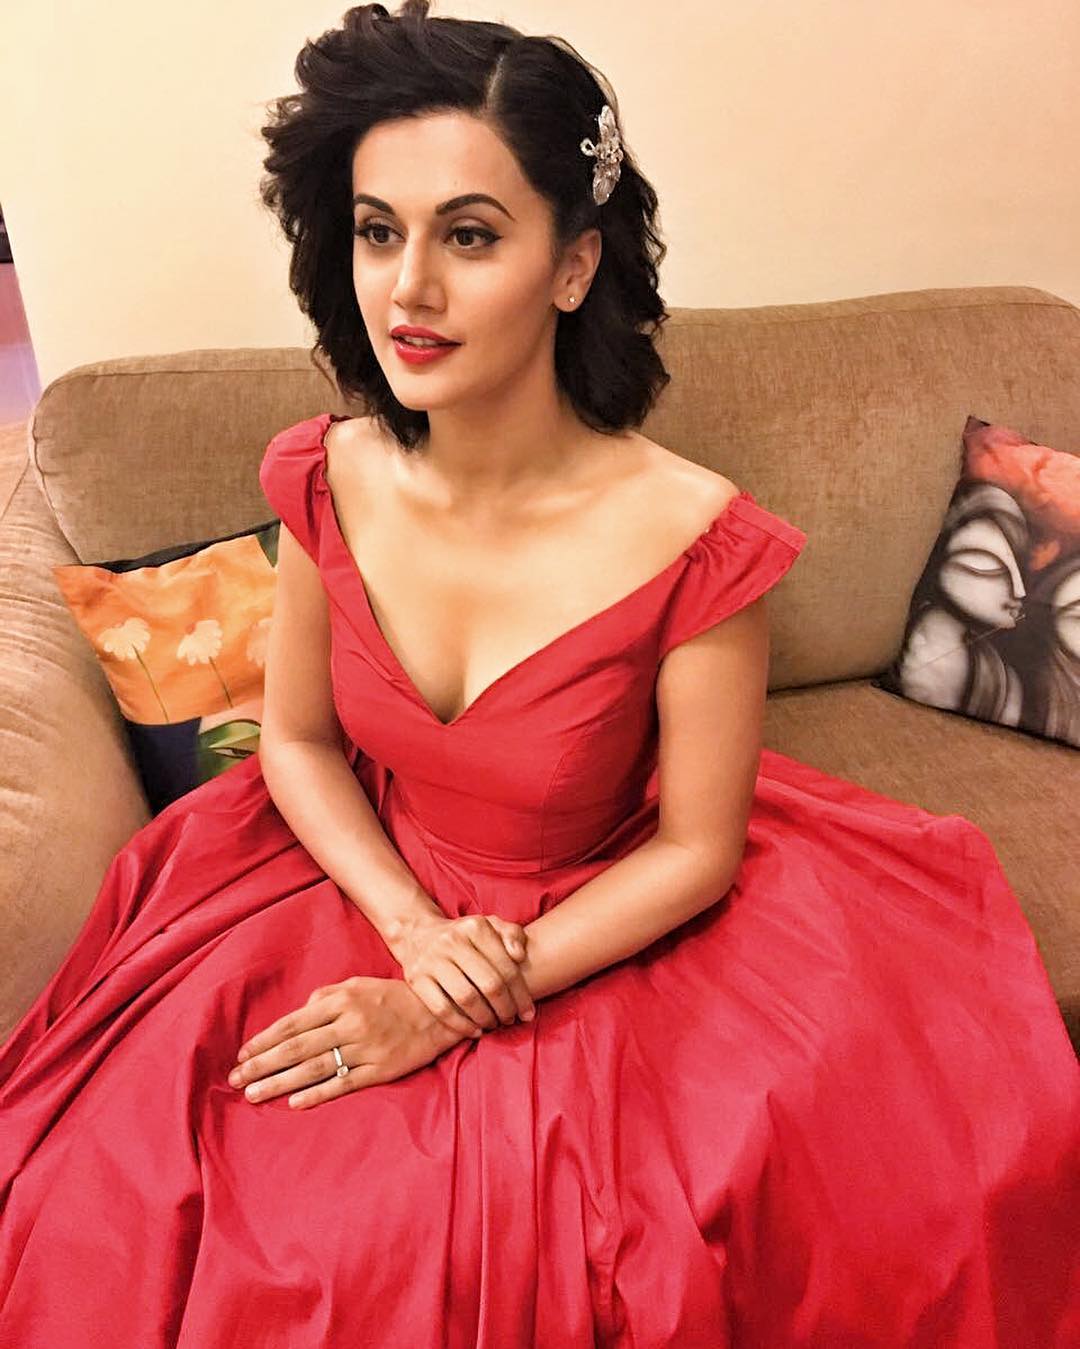 EXCLUSIVE: Taapsee Pannu - I can look forward to being in Bollywood rather than thinking 'I'll quit when I'm ready to get married'